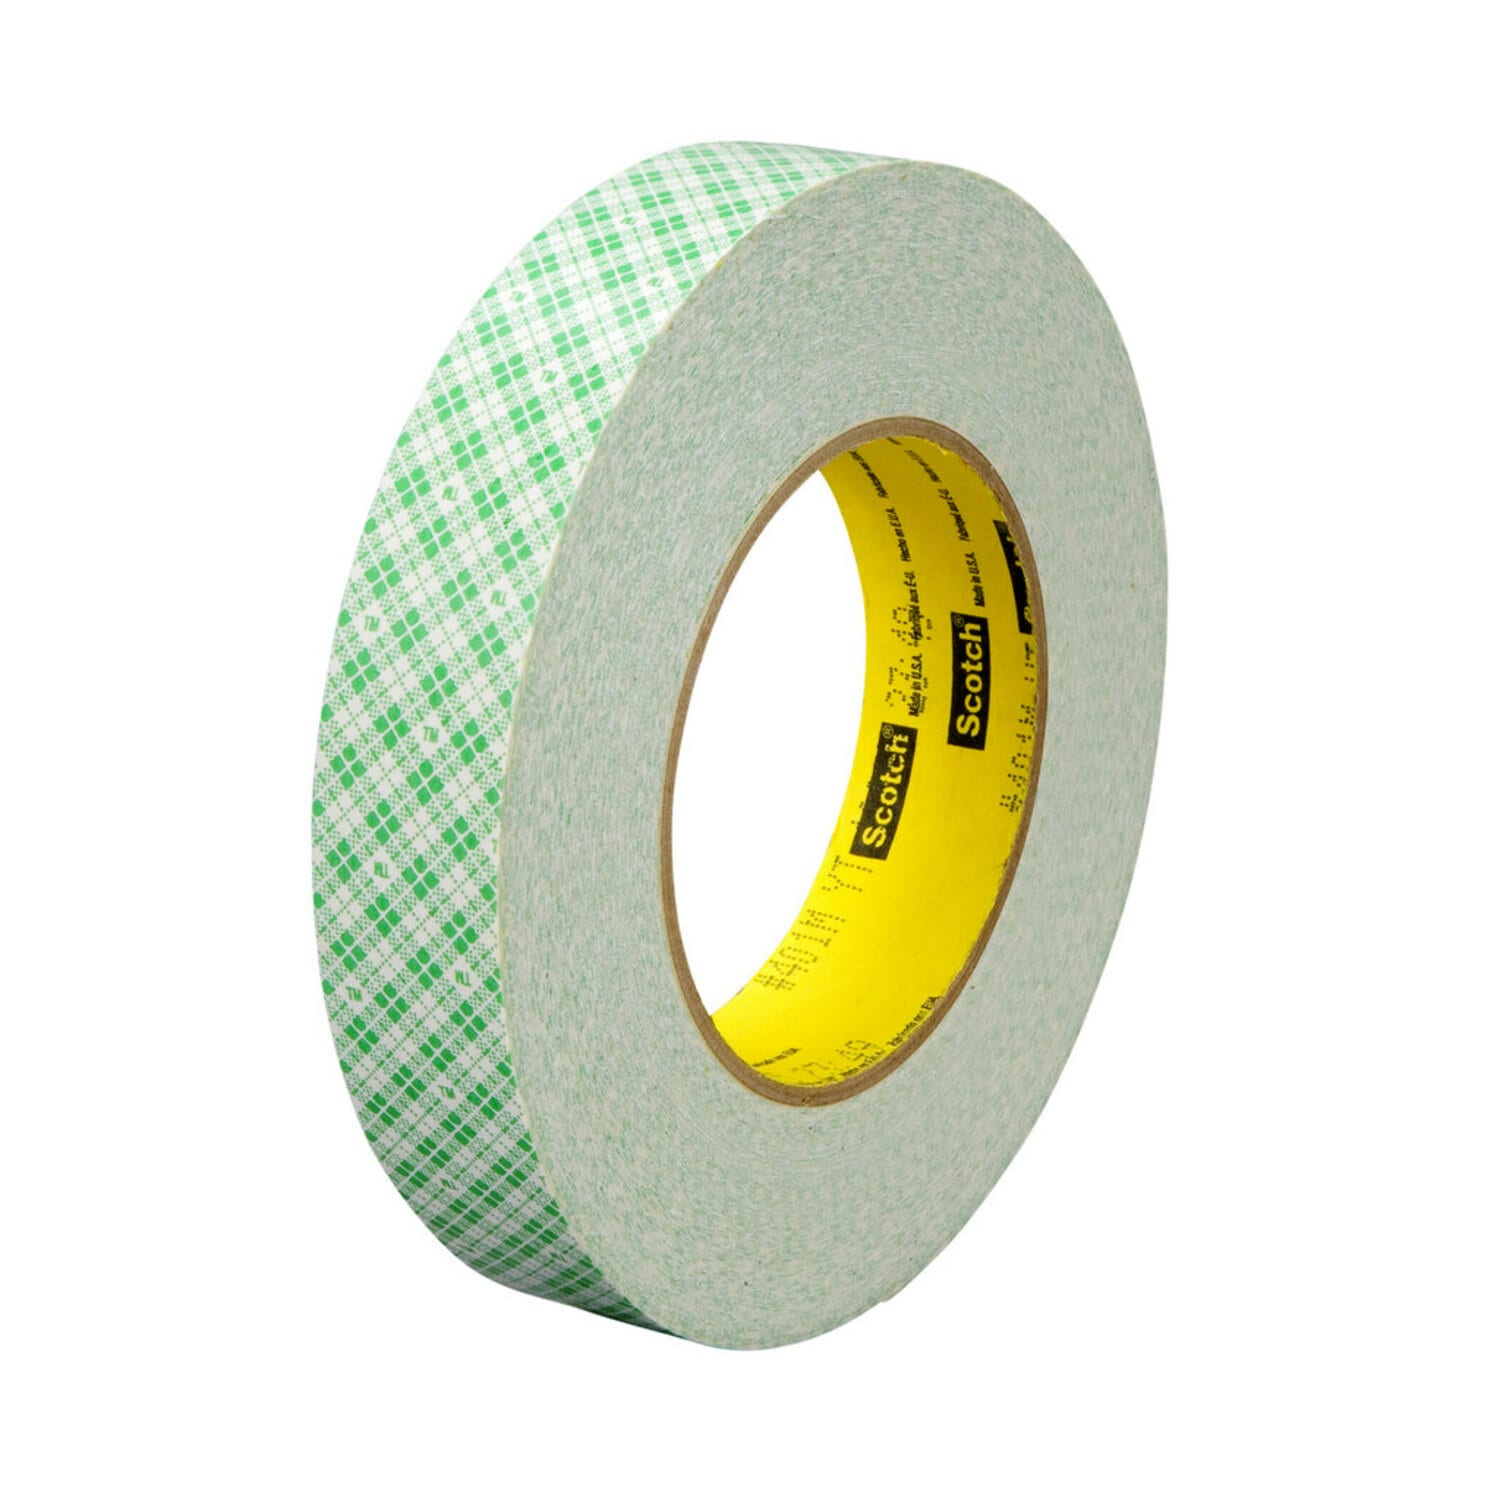 7000049332 - 3M Double Coated Paper Tape 401M, Natural, 2 in x 36 yd, 9 mil, 24
rolls per case